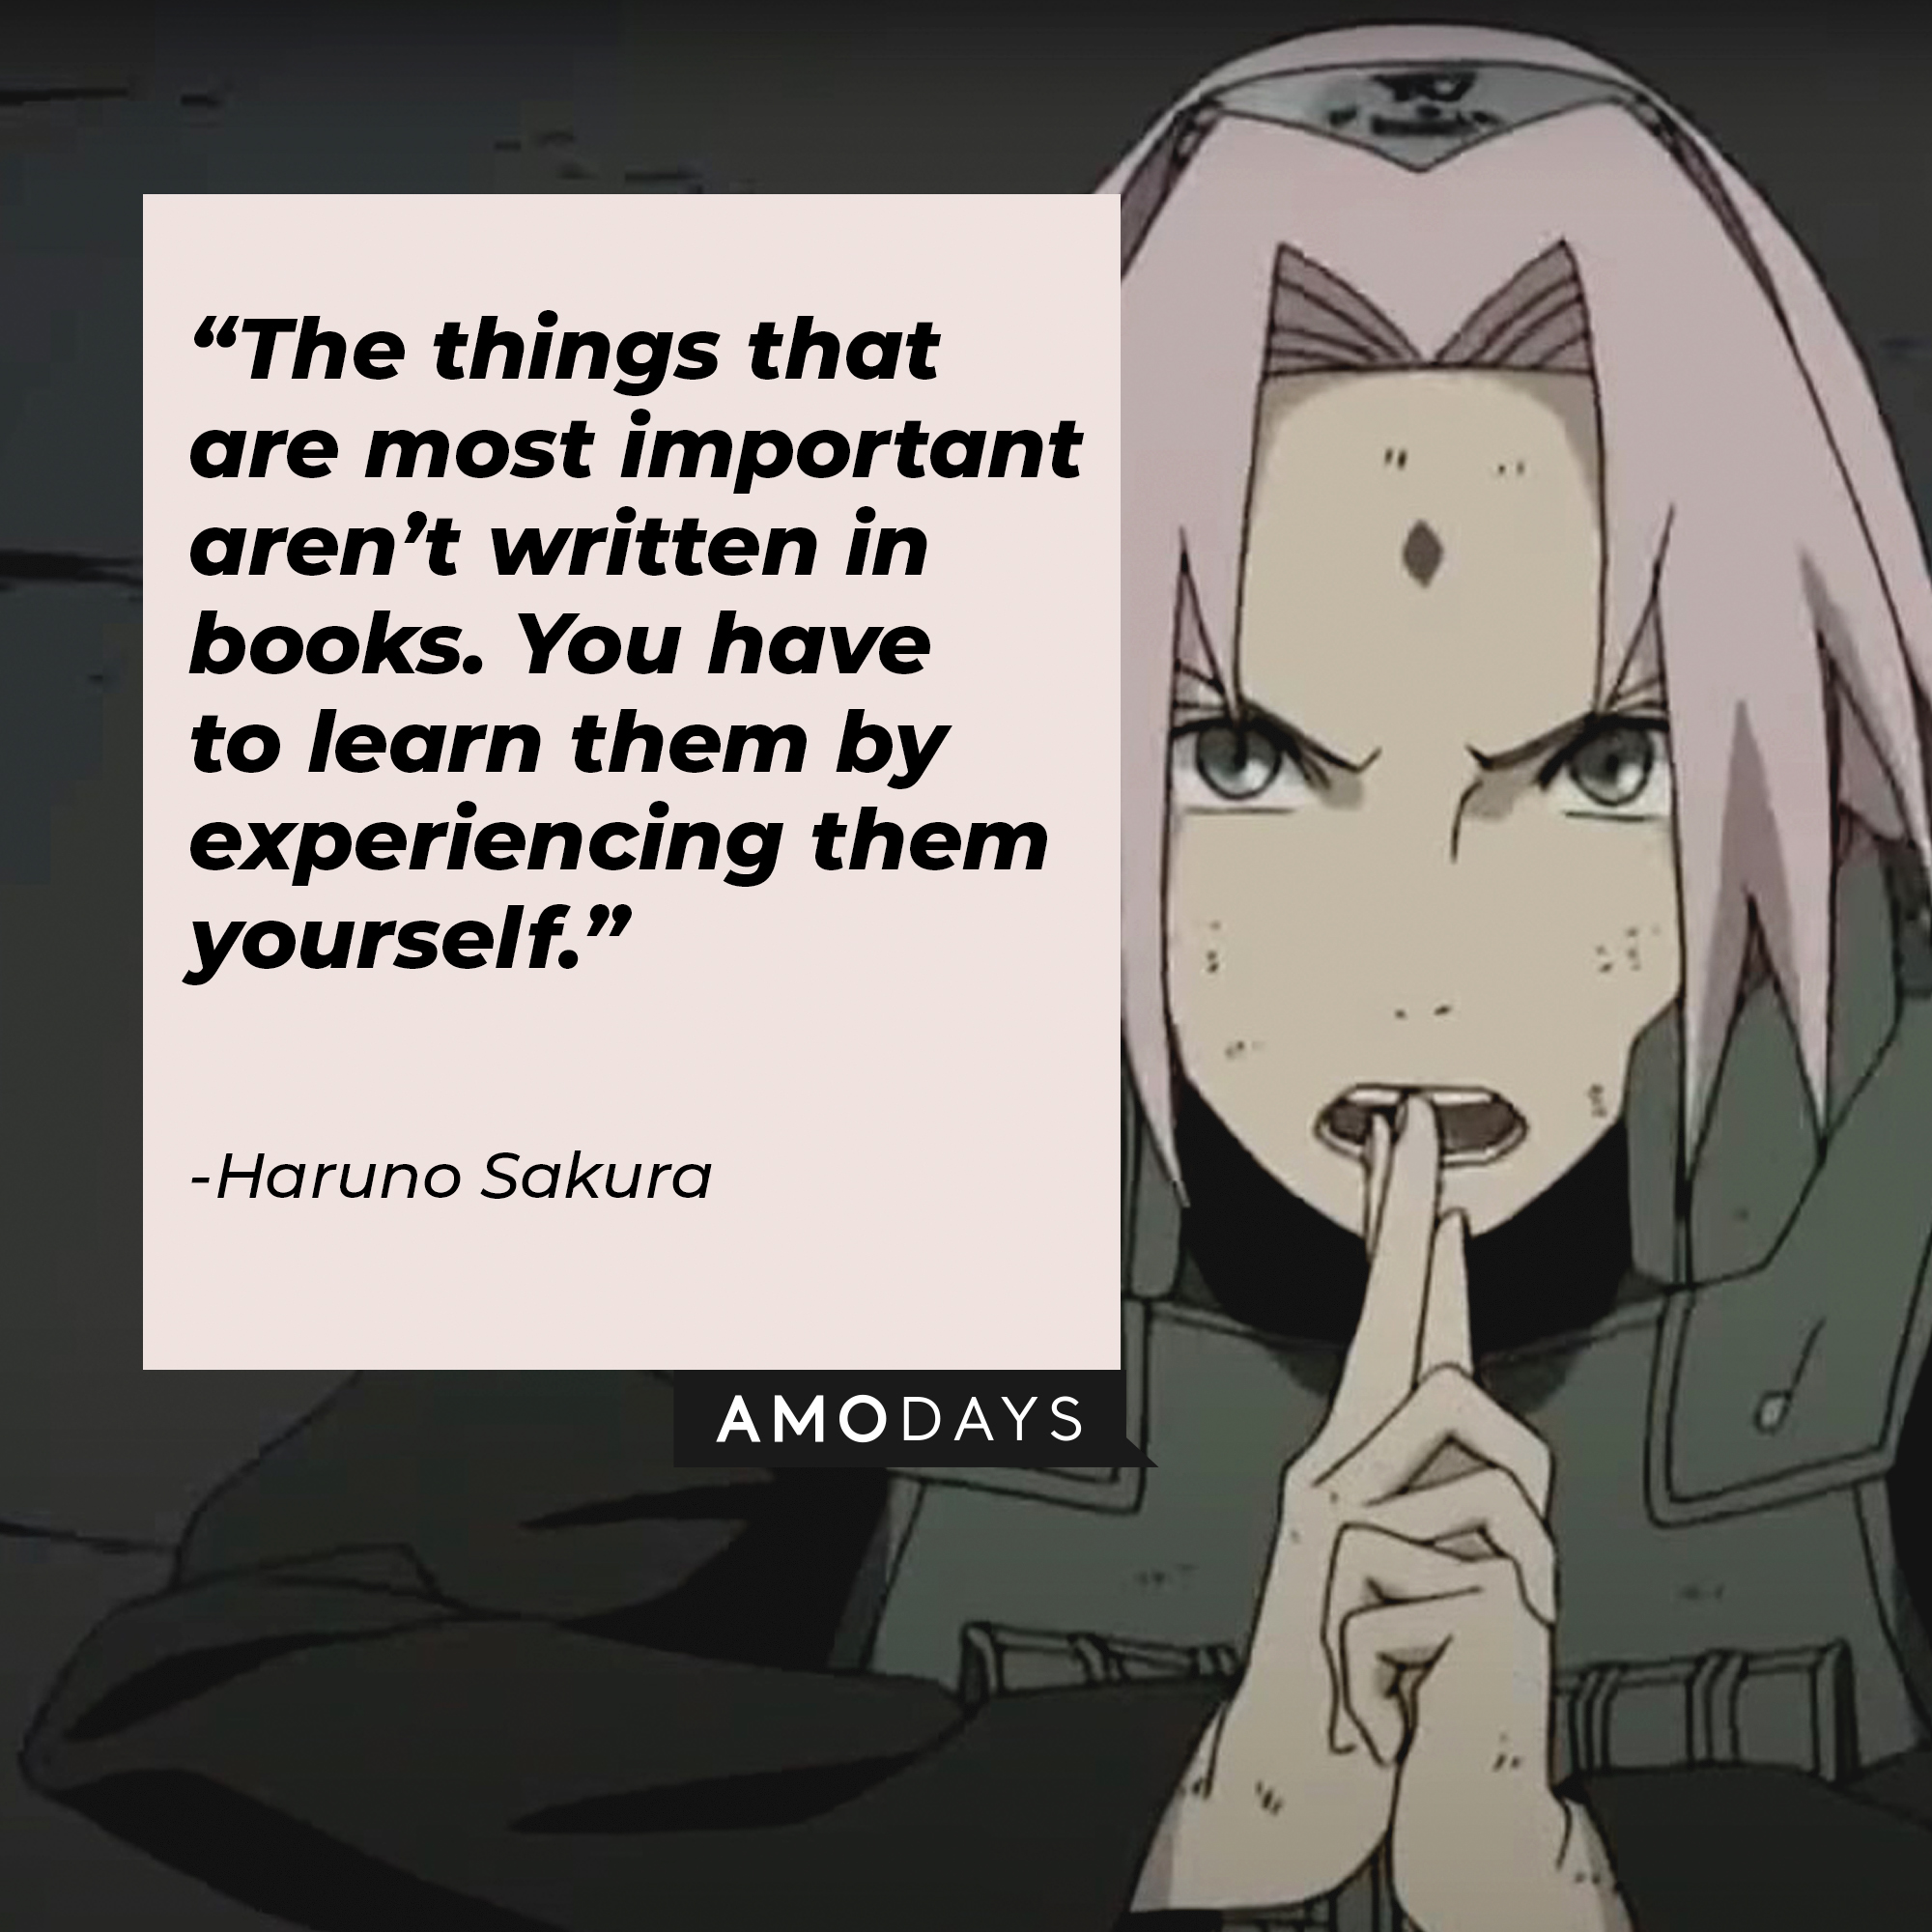 Haruno Sakura’s quote: “The things that are most important aren’t written in books. You have to learn them by experiencing them yourself.” | Source: facebook.com/narutoofficialsns